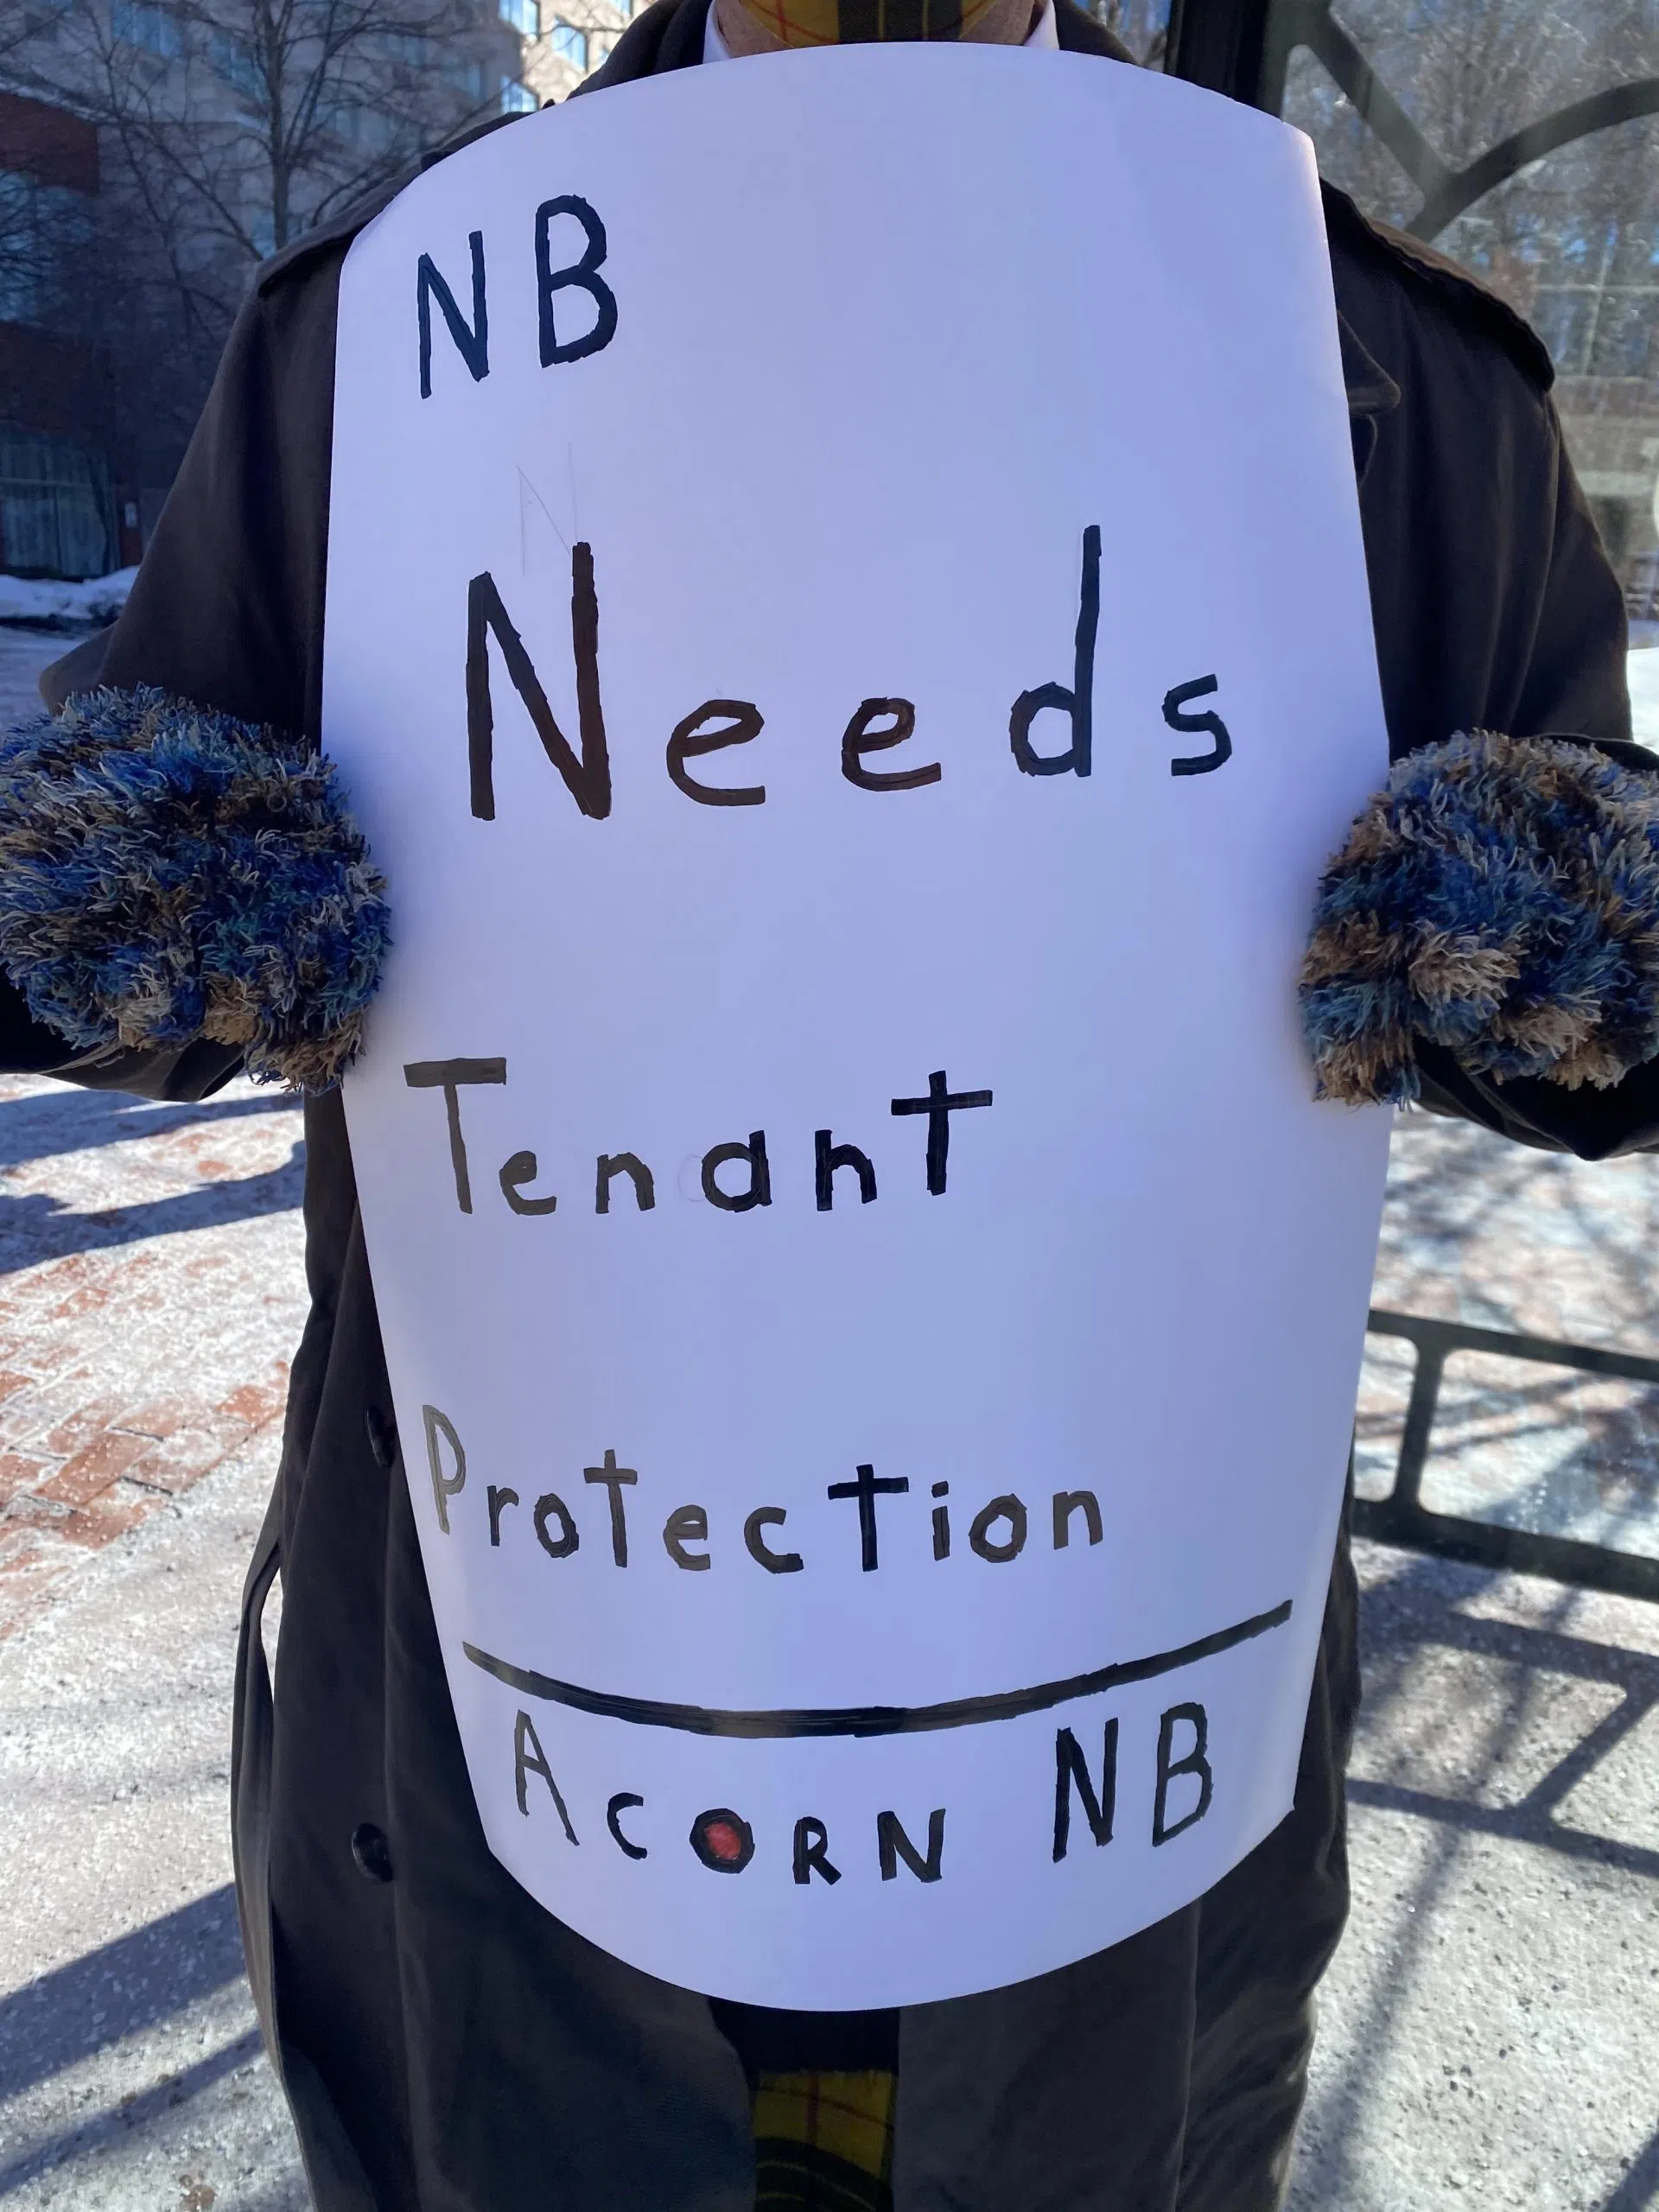 Protests Held In Moncton For N.B. Tenants Rights